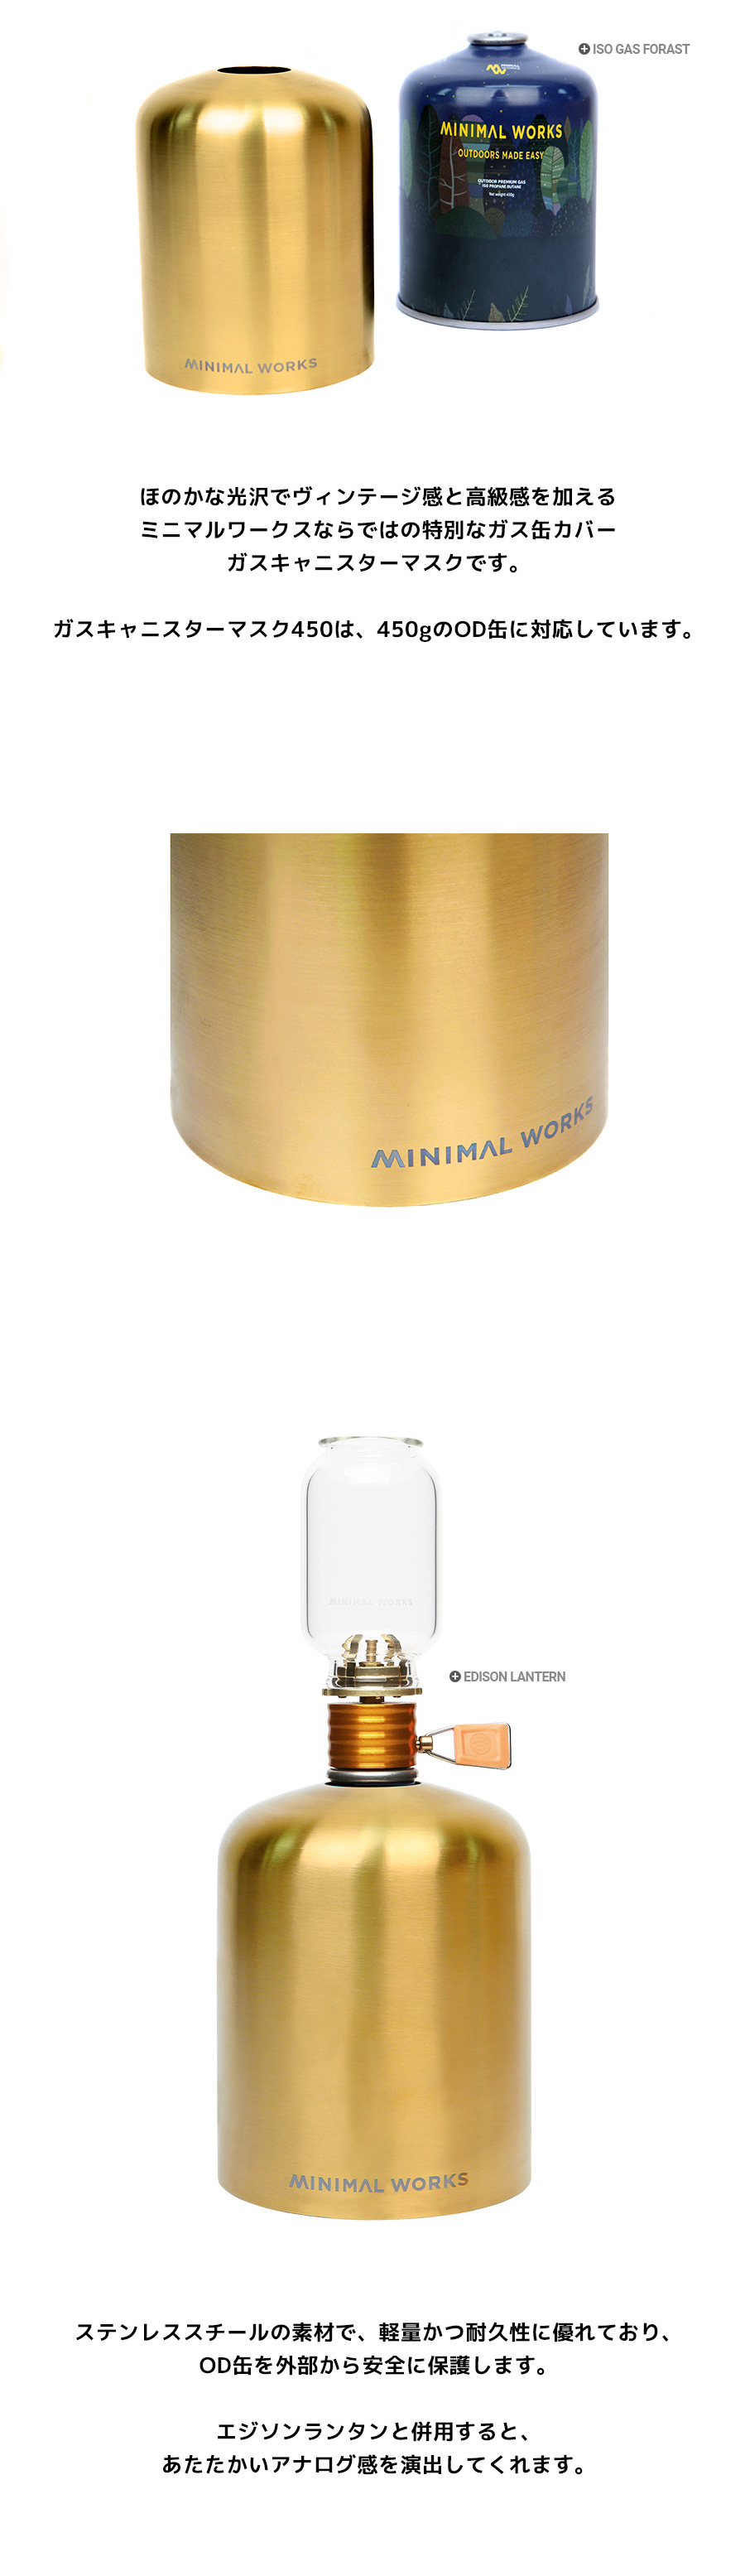 MINIMAL WORKS (ミニマルワークス) GAS CANISTER MASK 450g ガス 